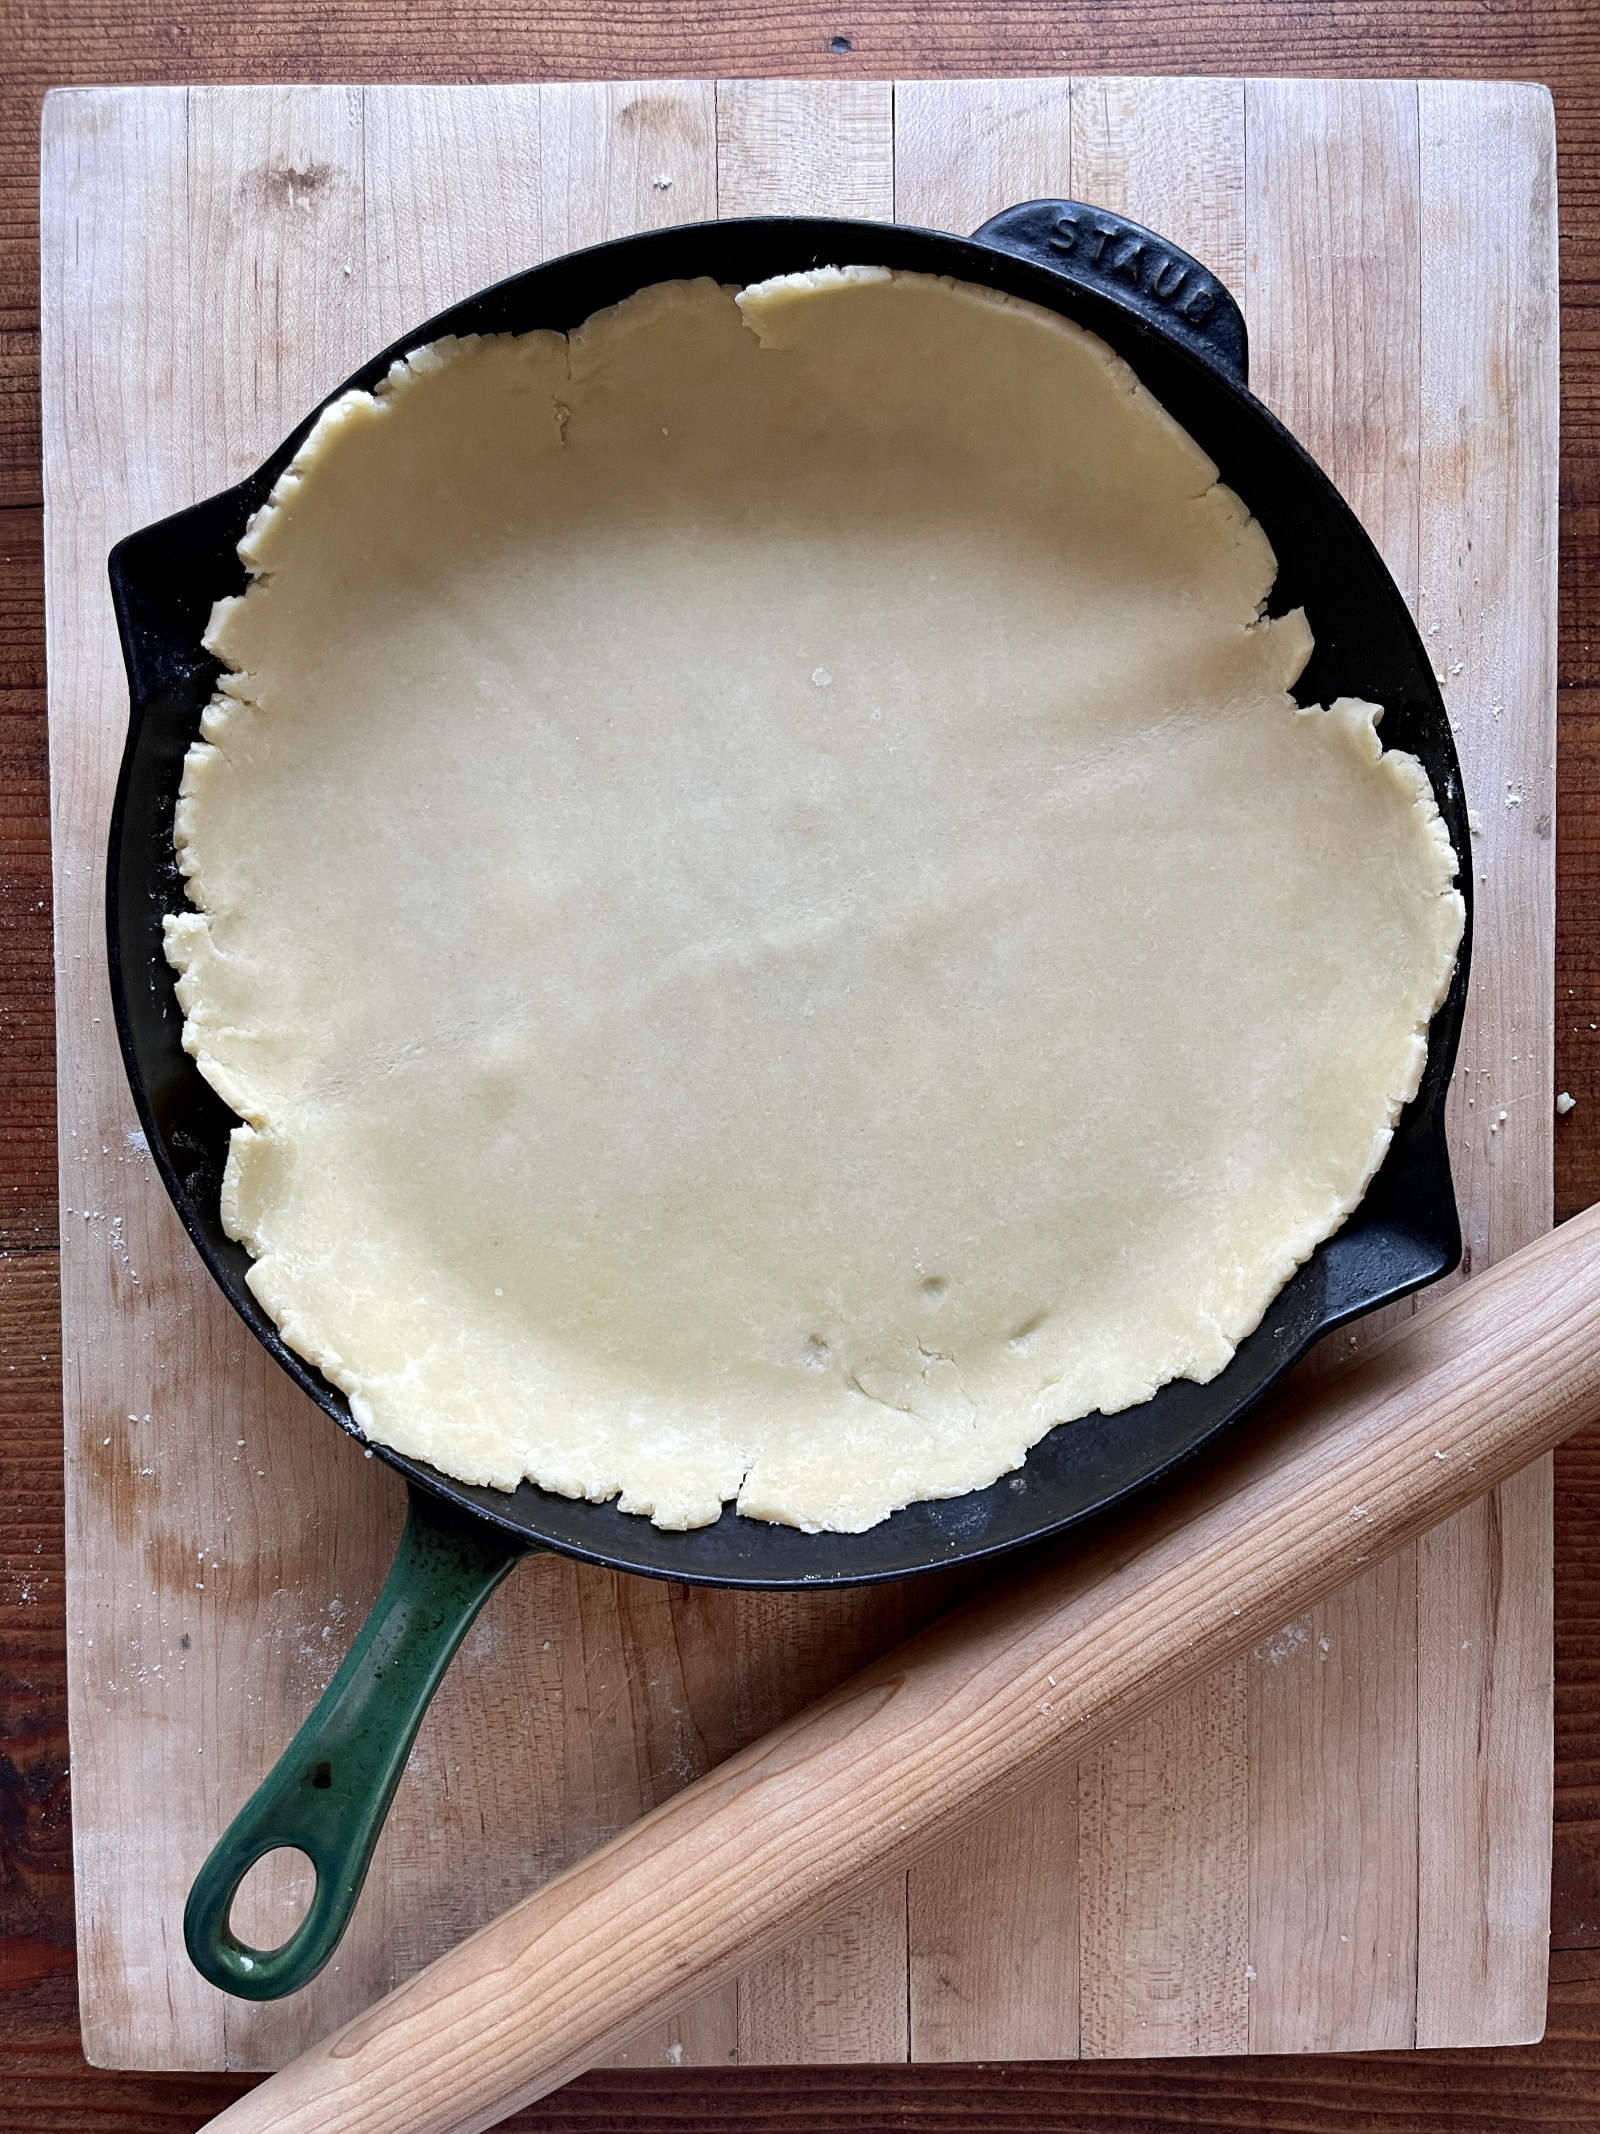 Semolina pastry lines a 12-inch cast iron pan. A tapered rolling pin rests below it. The background is a light colored wooden cutting board.